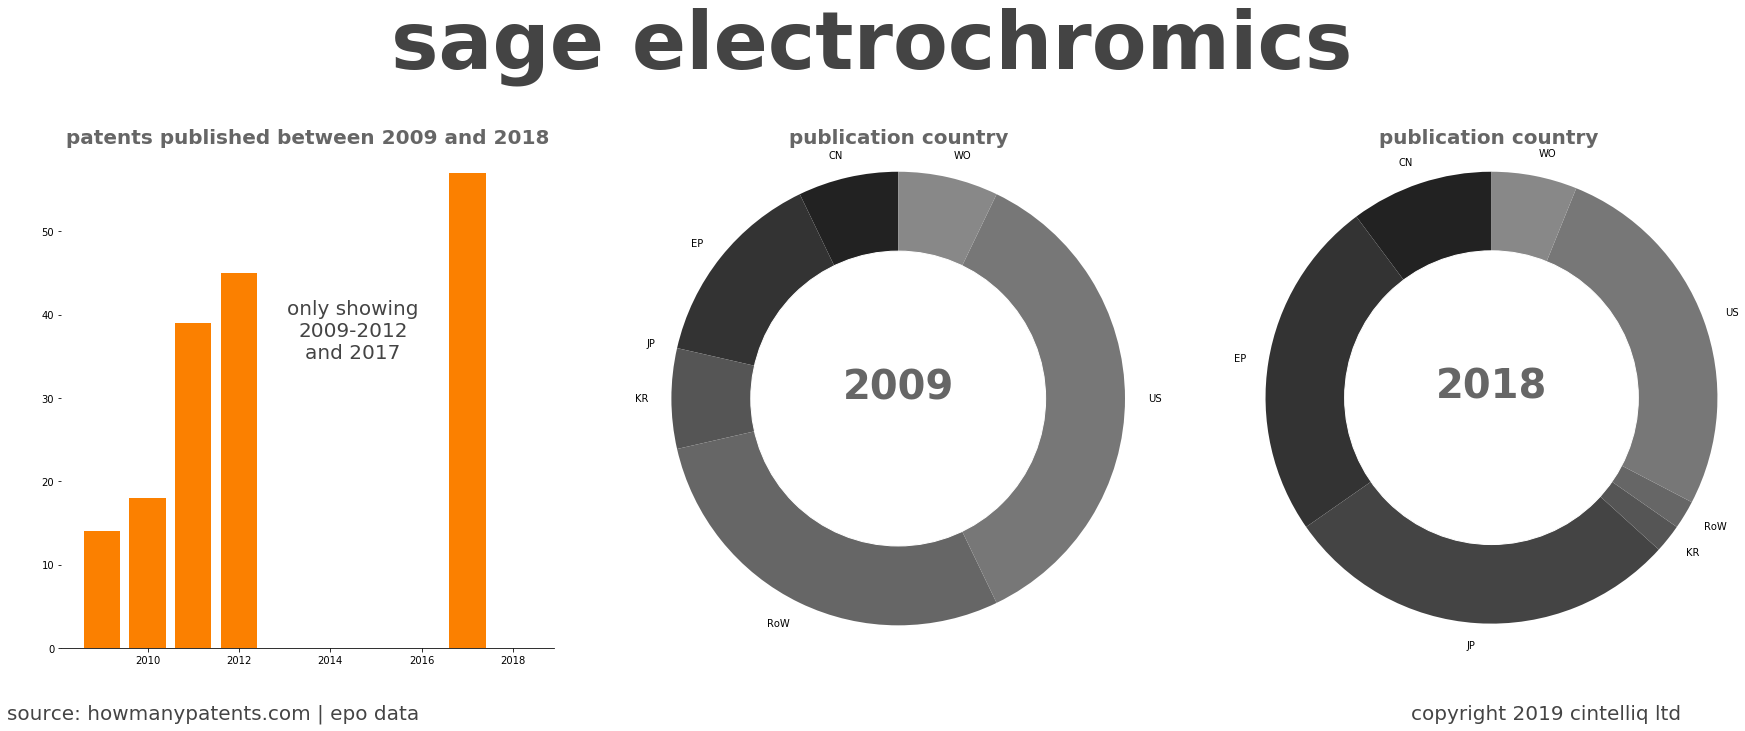 summary of patents for Sage Electrochromics